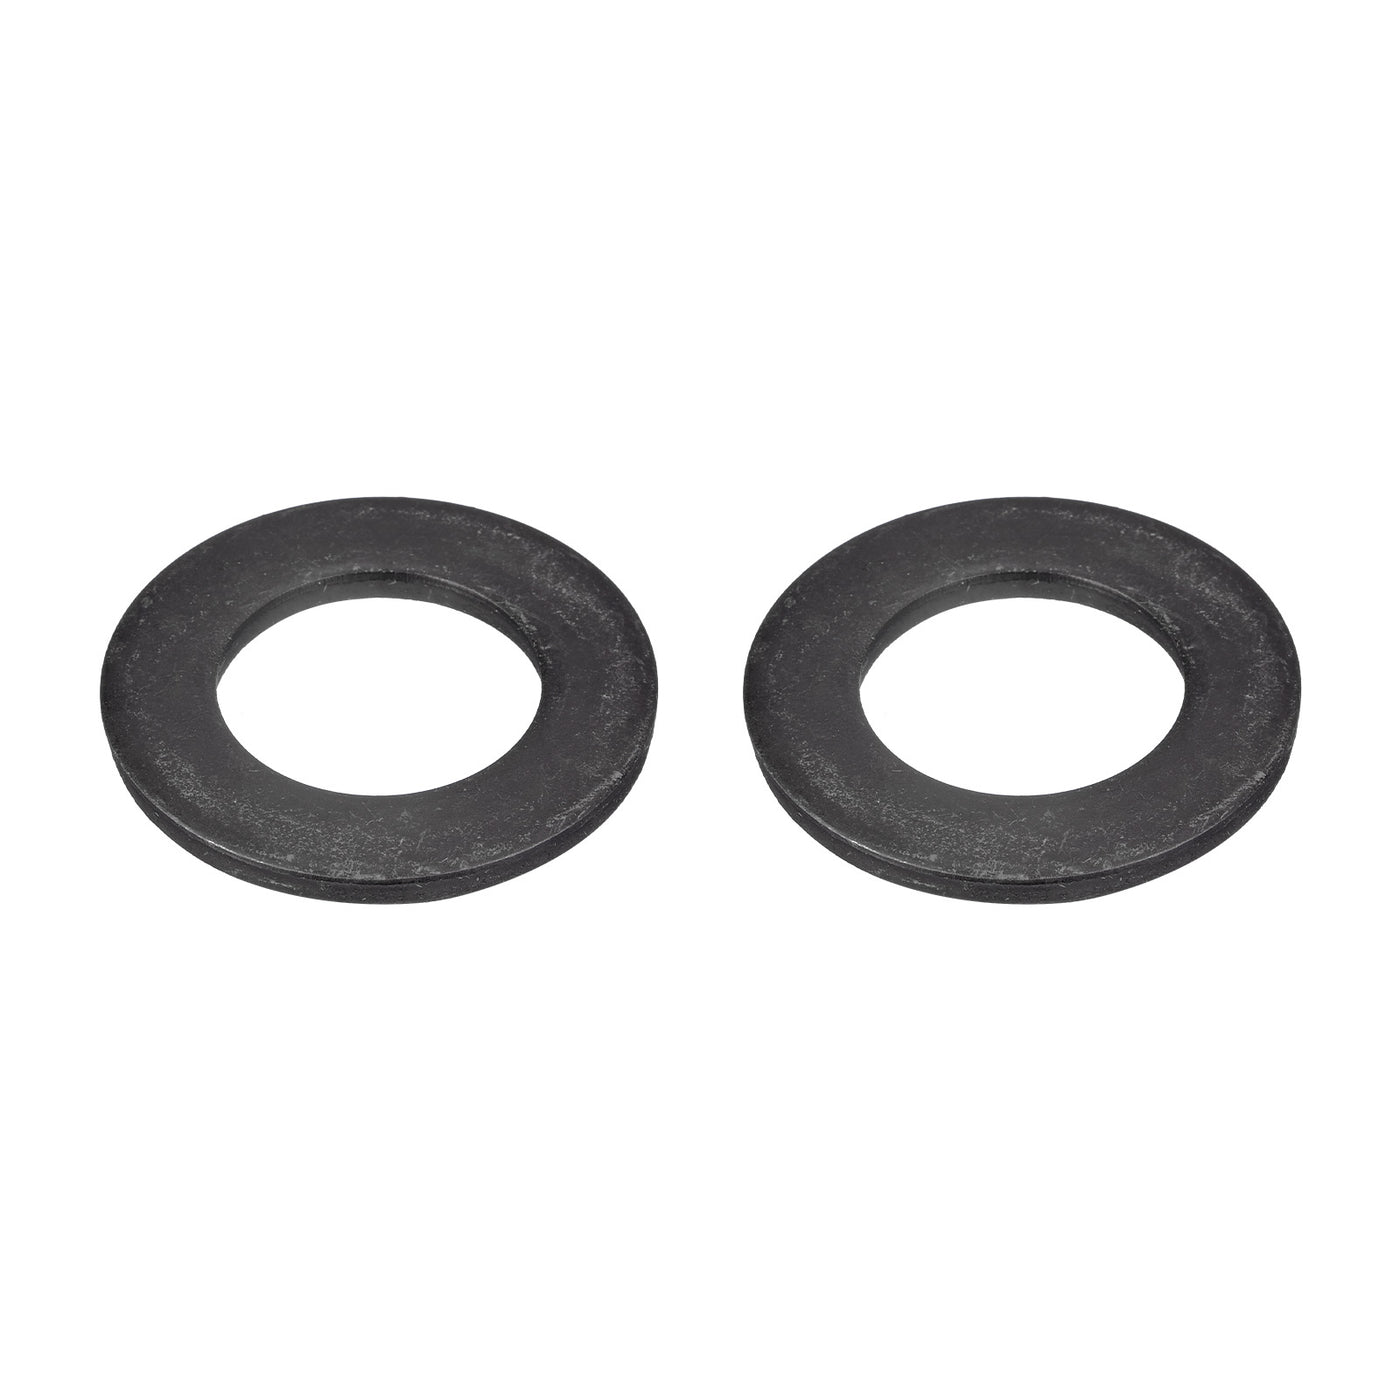 uxcell Uxcell M24 Carbon Steel Flat Washer 2pcs 25x43.8x3.8mm Grade 8.8 Alloy Steel Fasteners